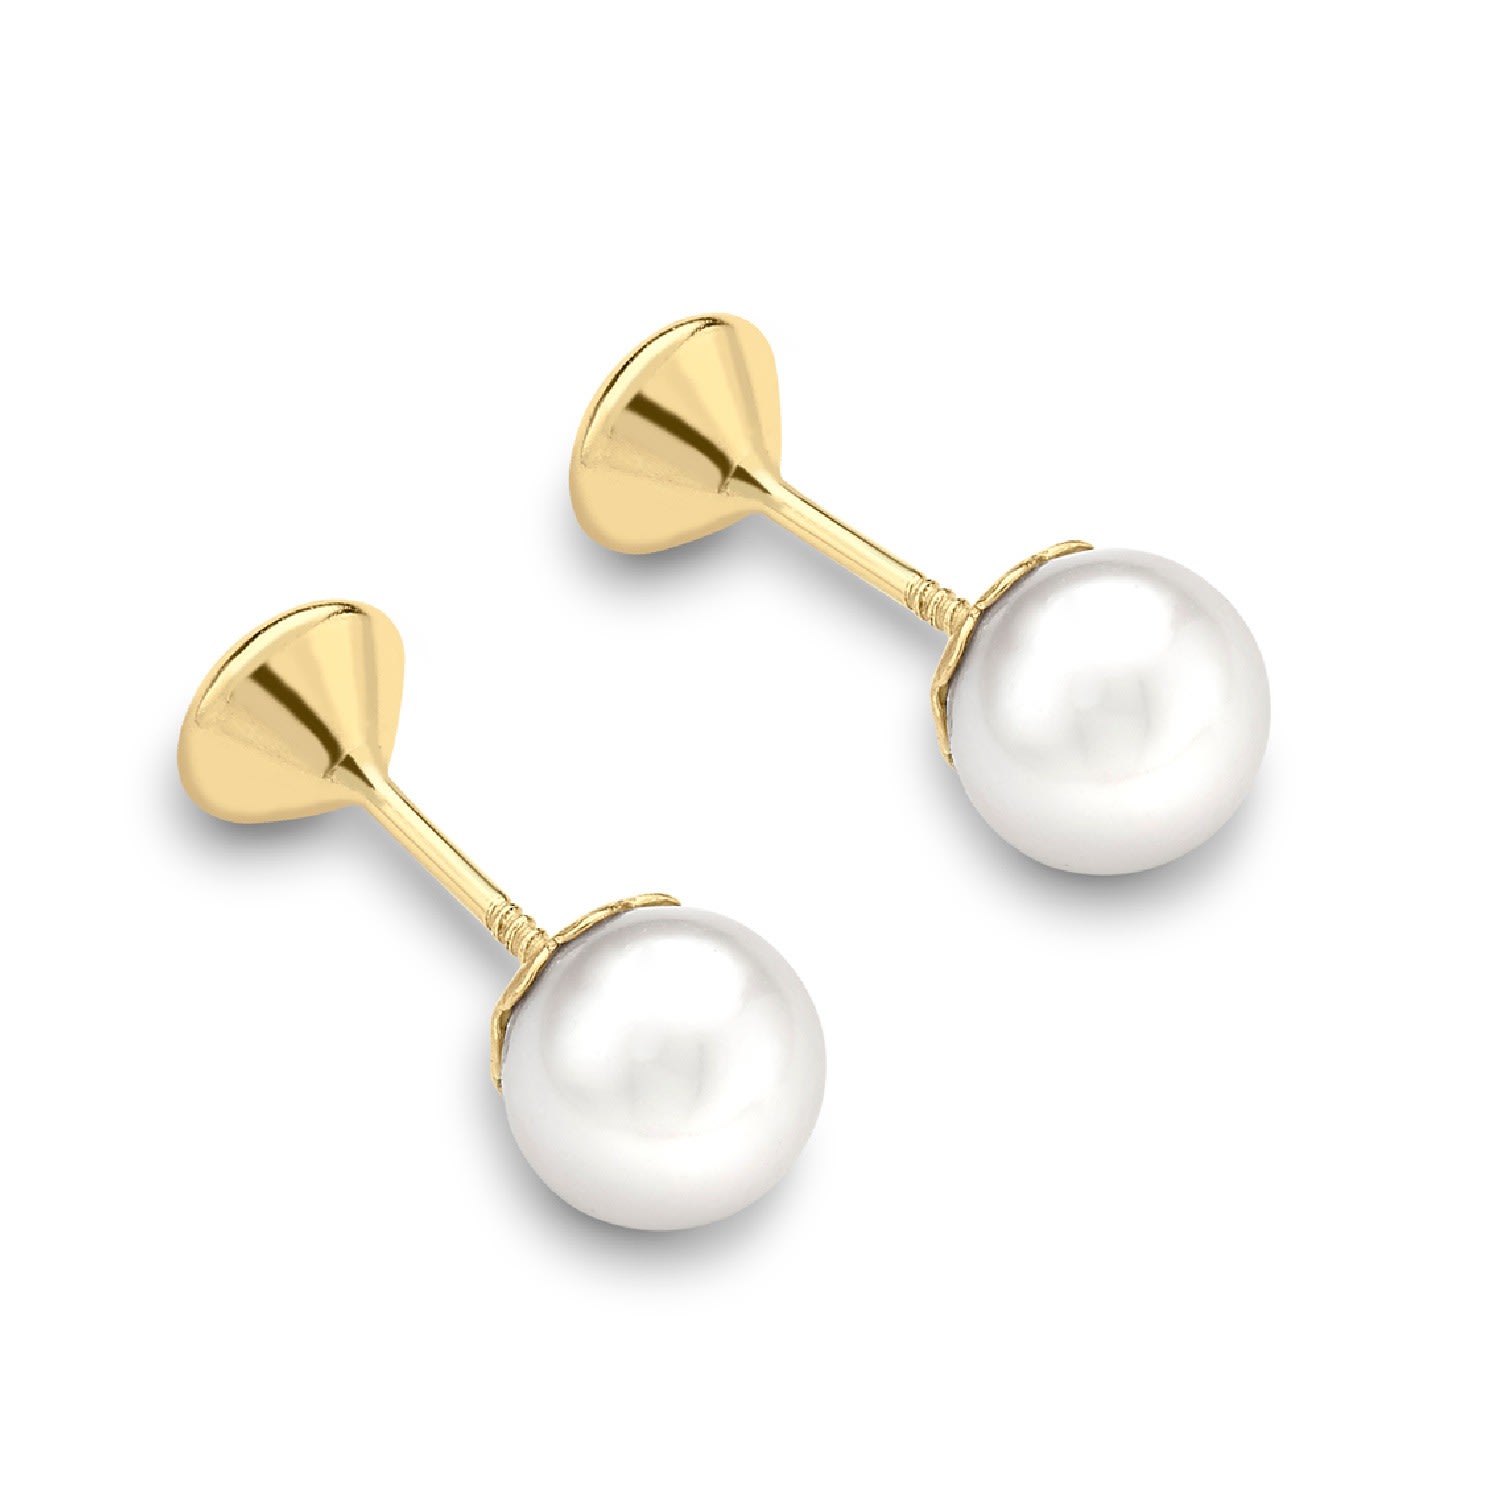 Women's Gold Pearl And Cz Stud Earrings Posh Totty Designs